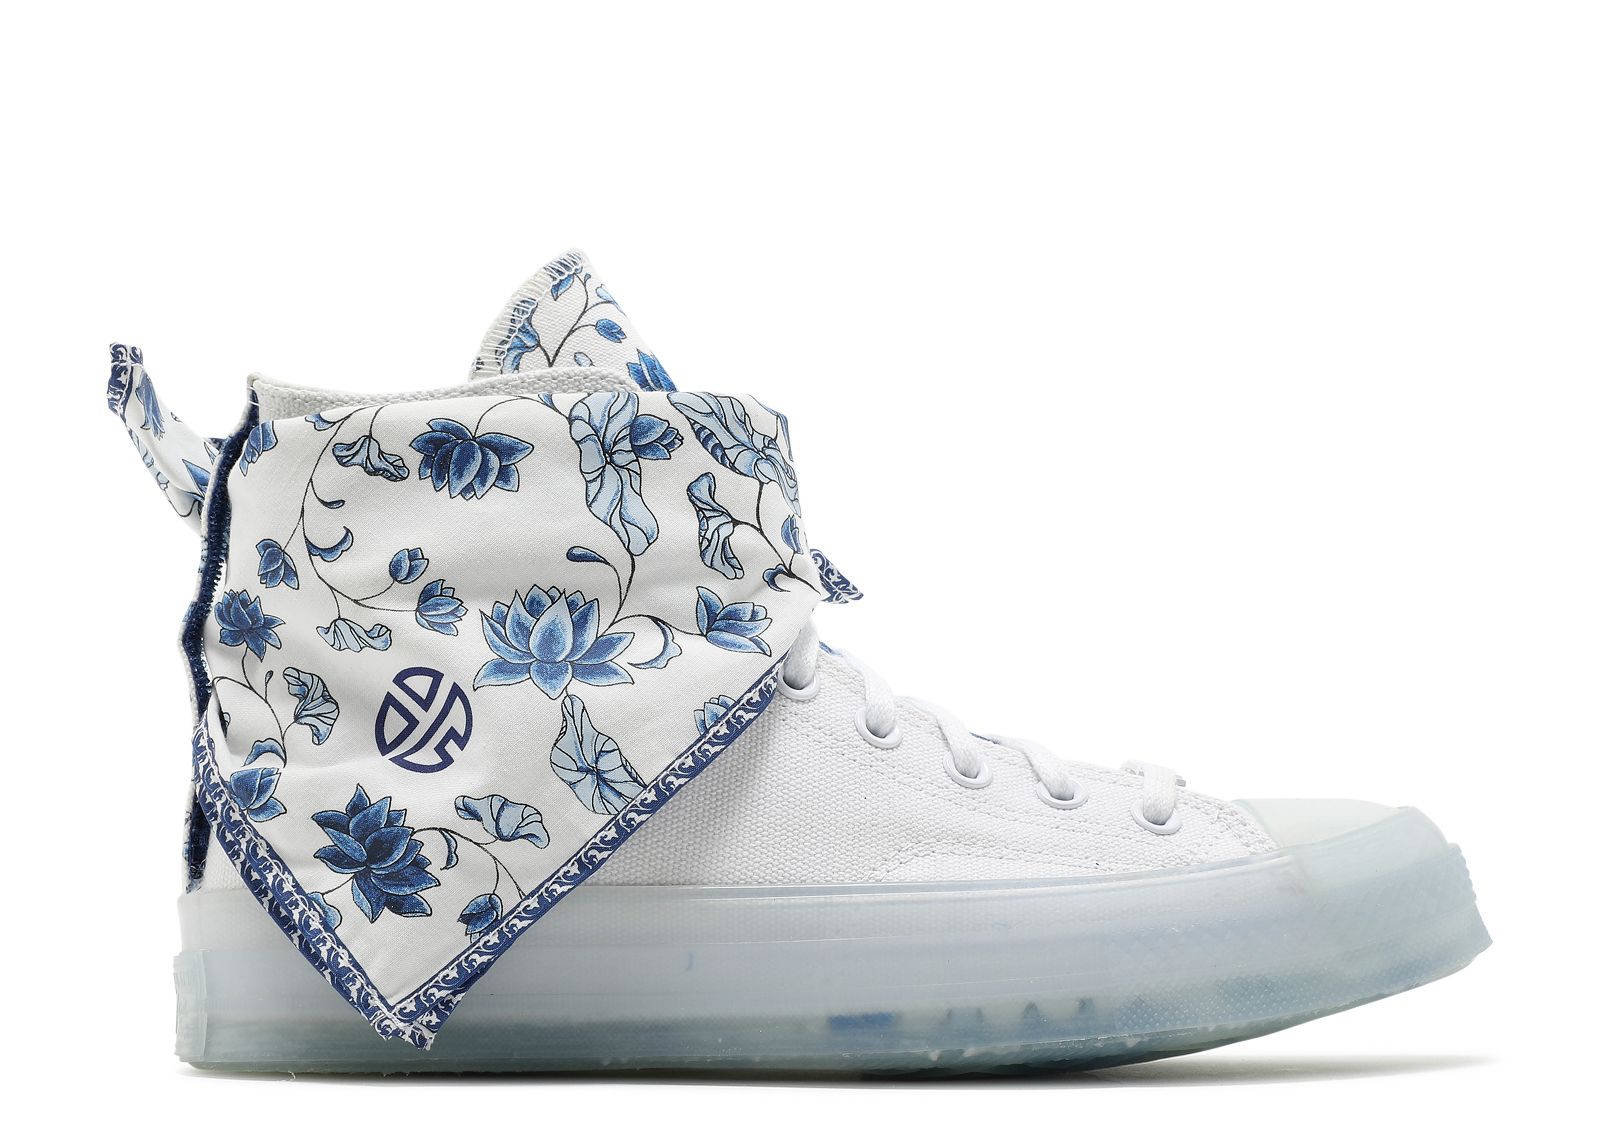 Кроссовки Converse Lay Zhang X Chuck 70 High 'Blue White Porcelain', белый zhang san buying shoes